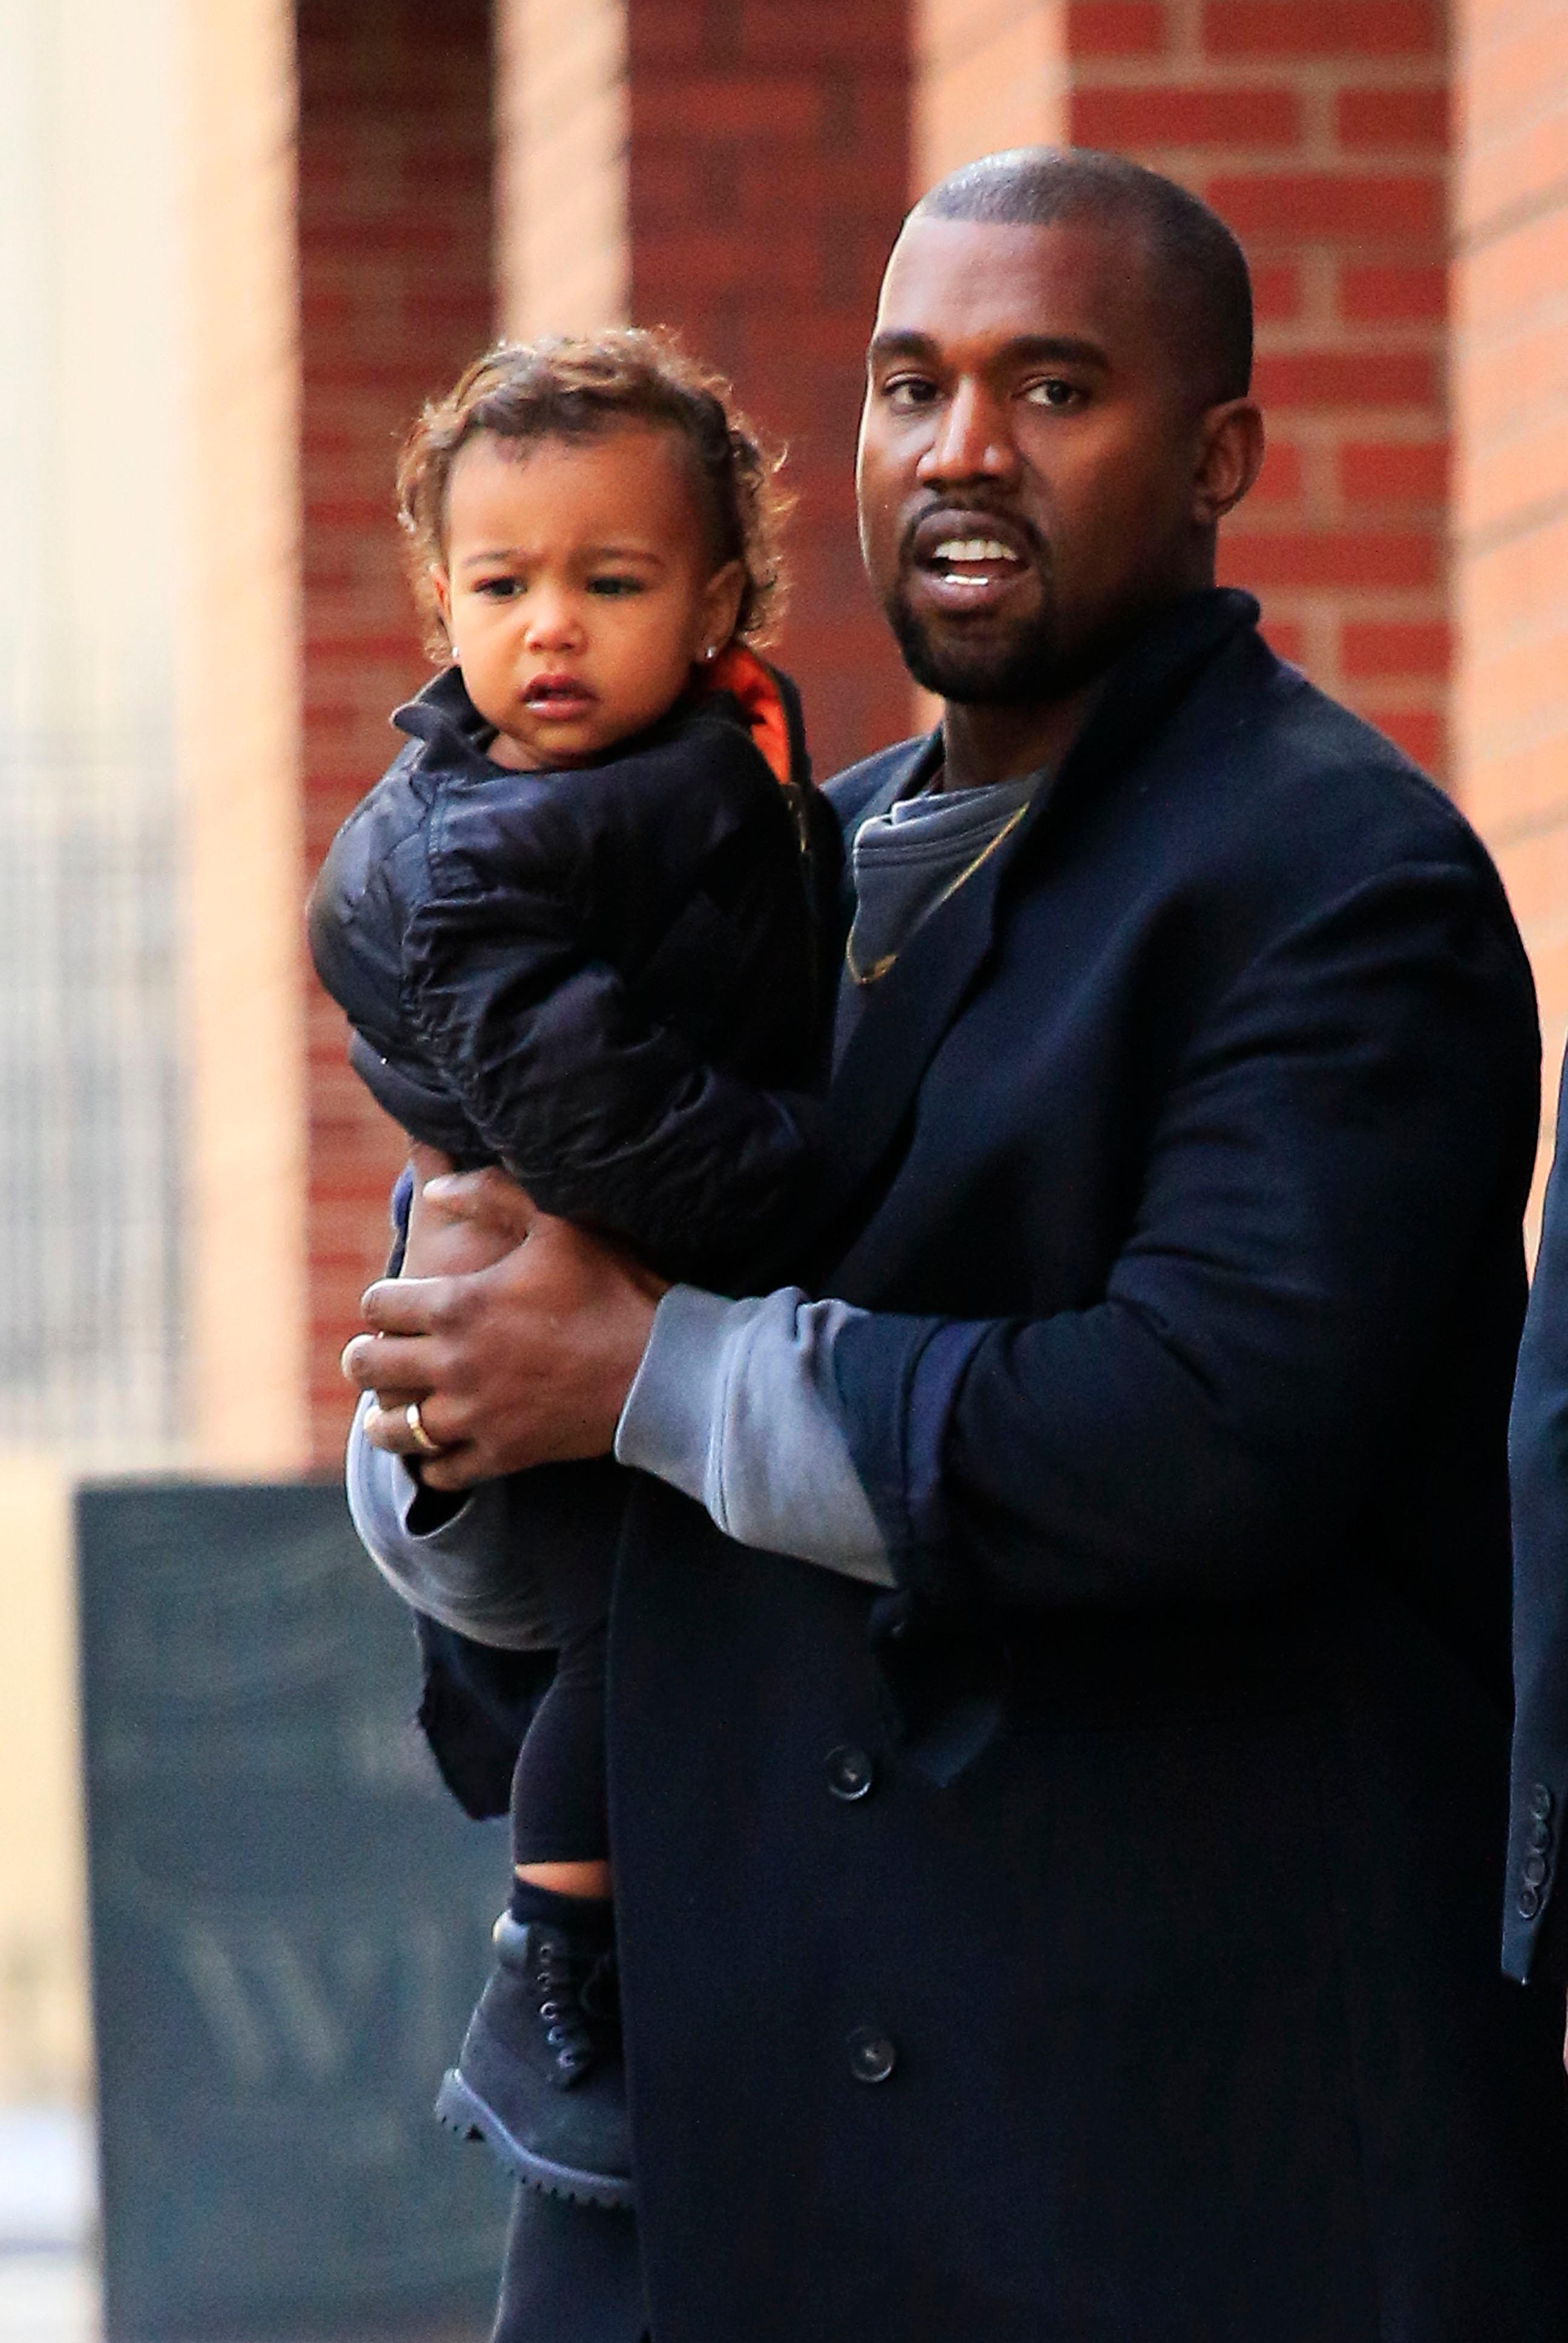 EXCLUSIVE: Kanye West carries baby daughter North West in SoHo, New York City